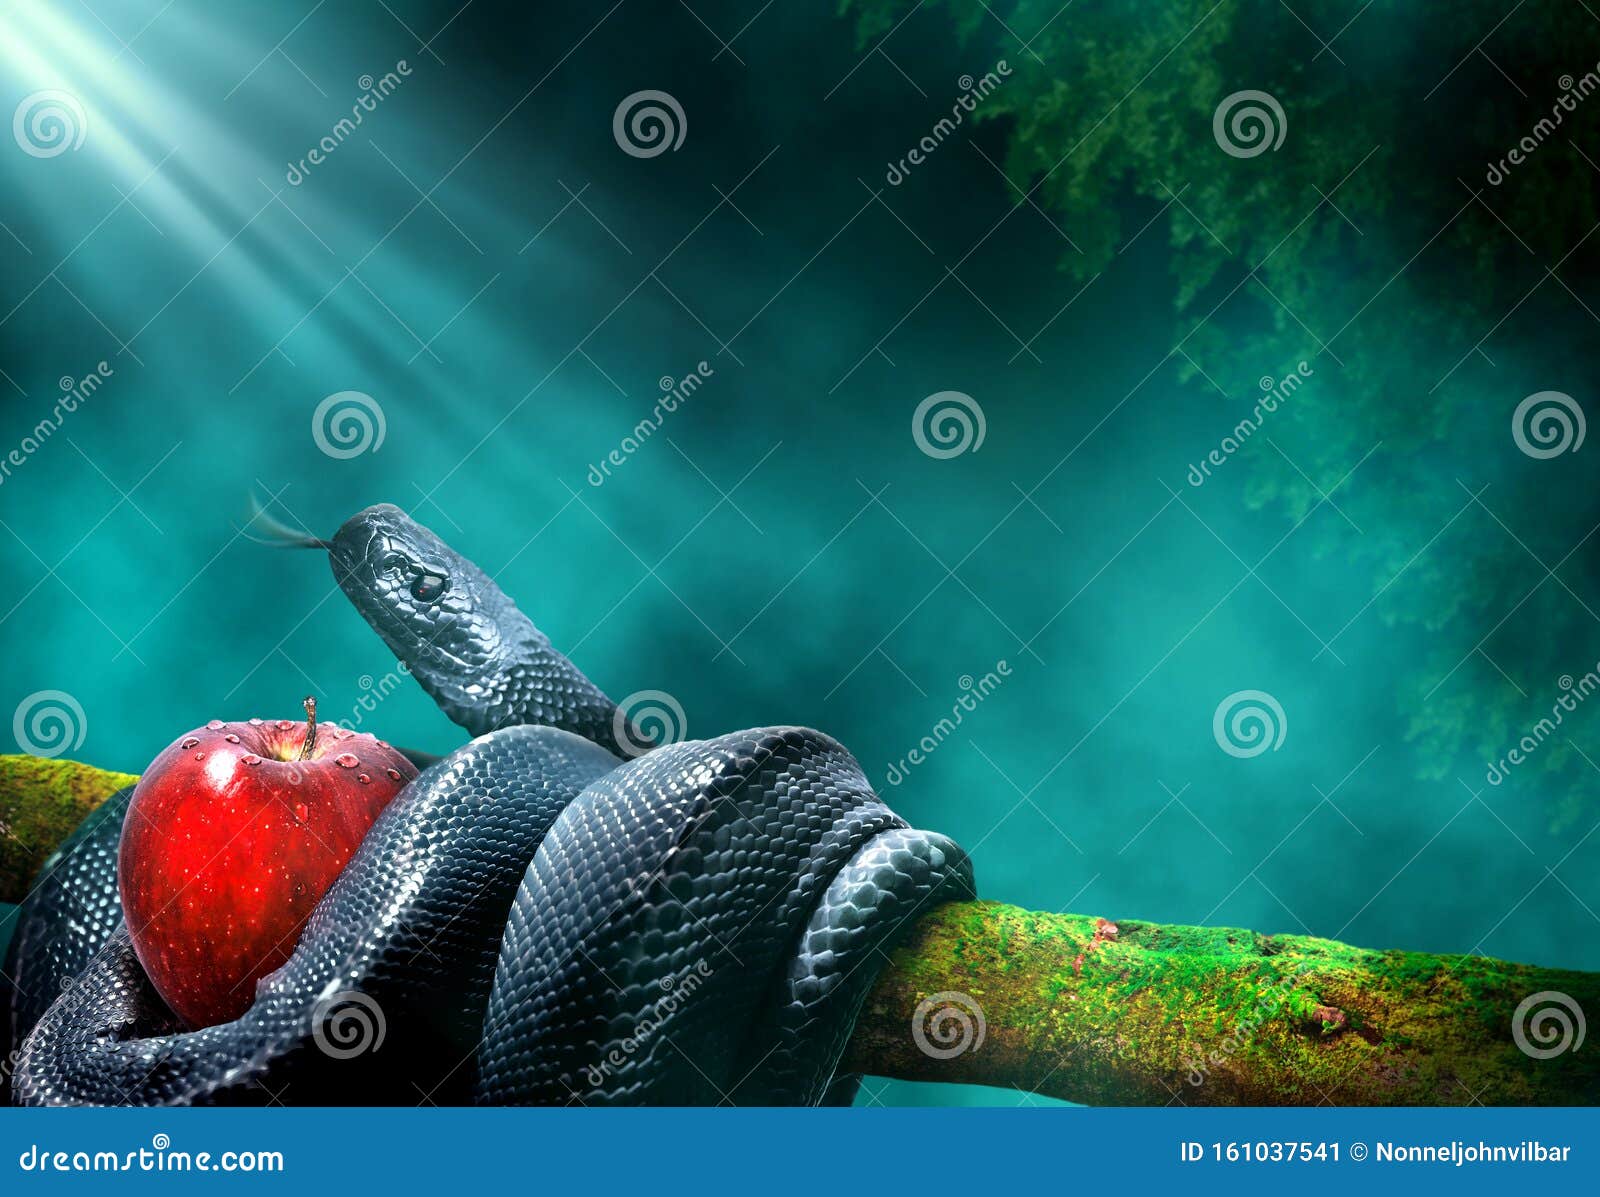 black snake with an apple fruit in a branch of a tree